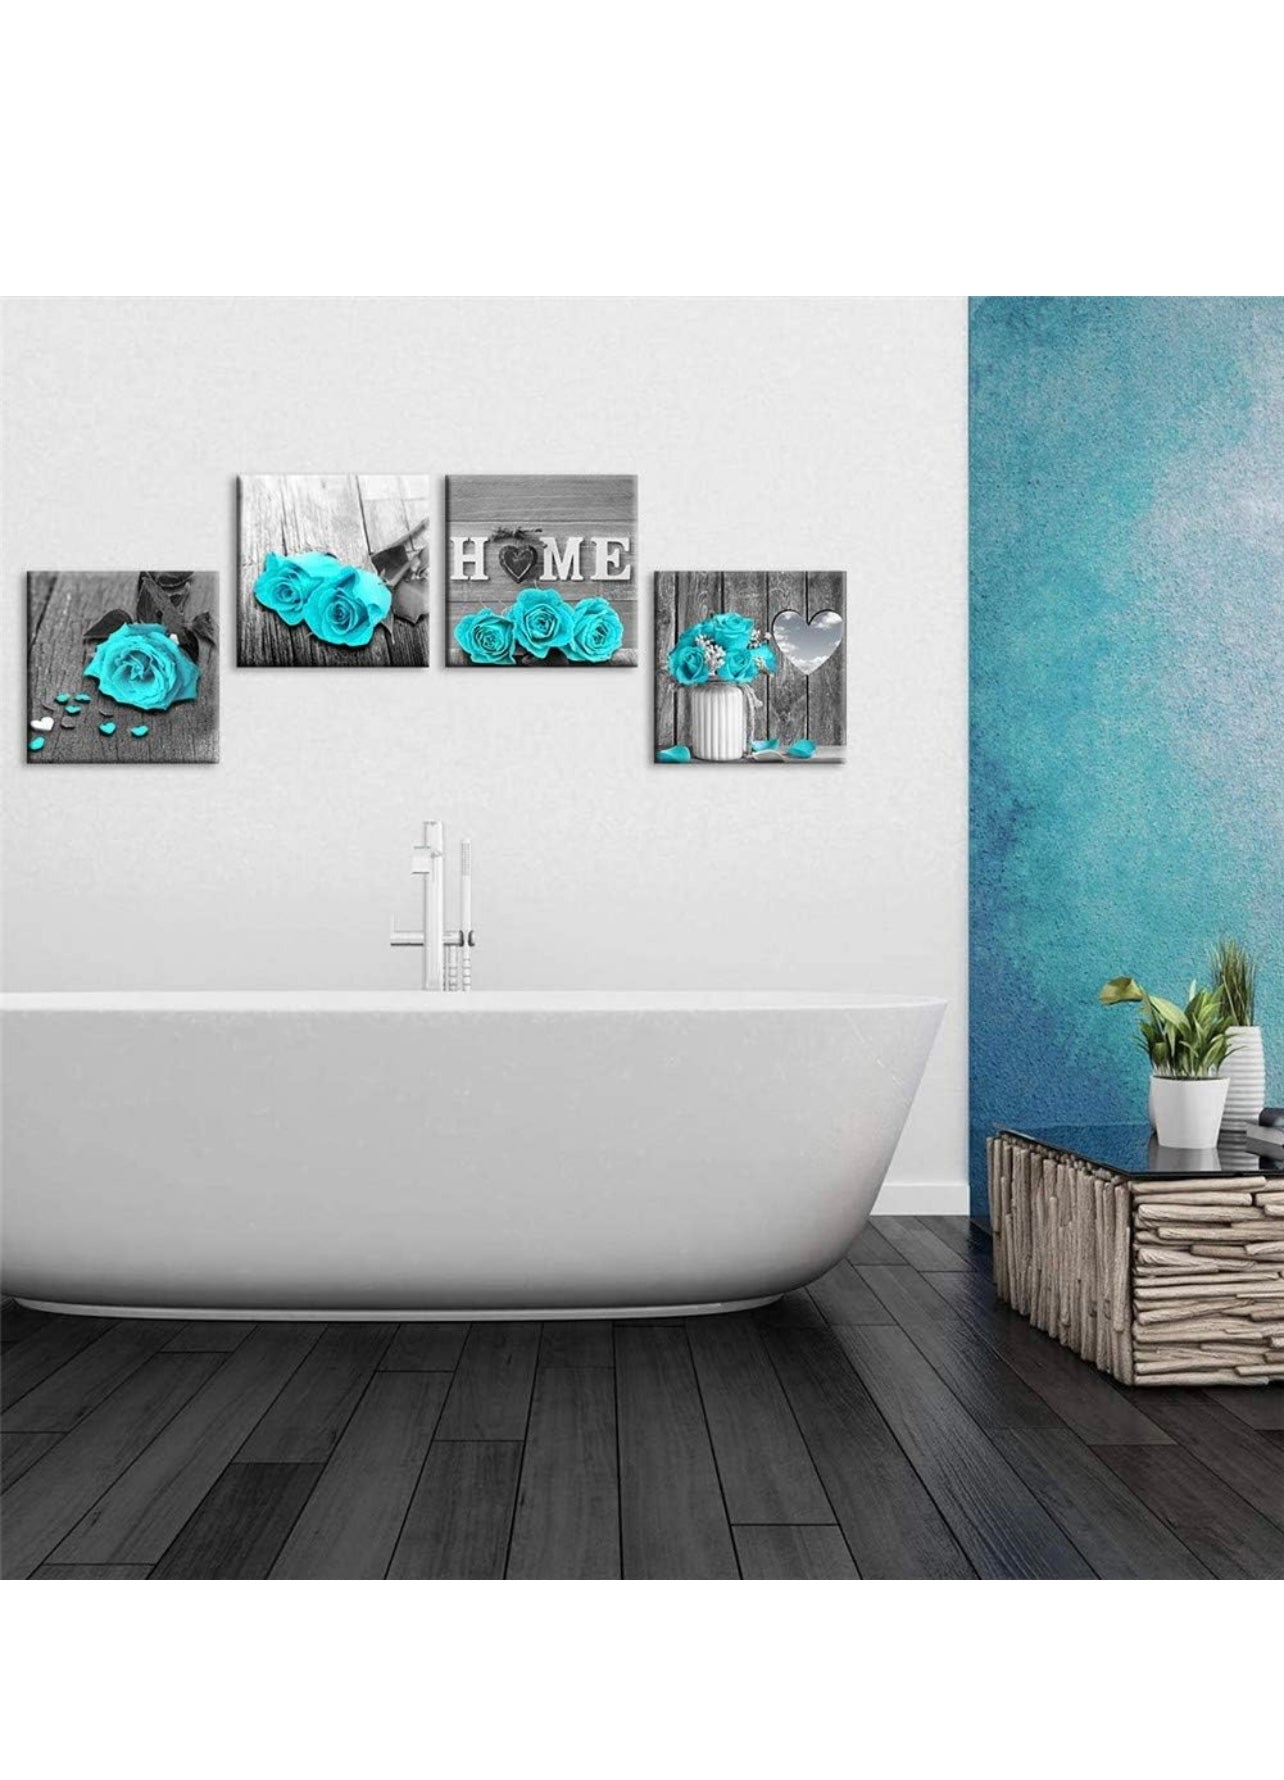 Wall Decor for Living Room Teal Blue Rose Flower Bathroom Decor Bedroom Wall Decor Black and White Canvas Art Home Love Couple Women Gifts Theme Modern Frame Pictures Turquoise Rustic Sets 14 inch